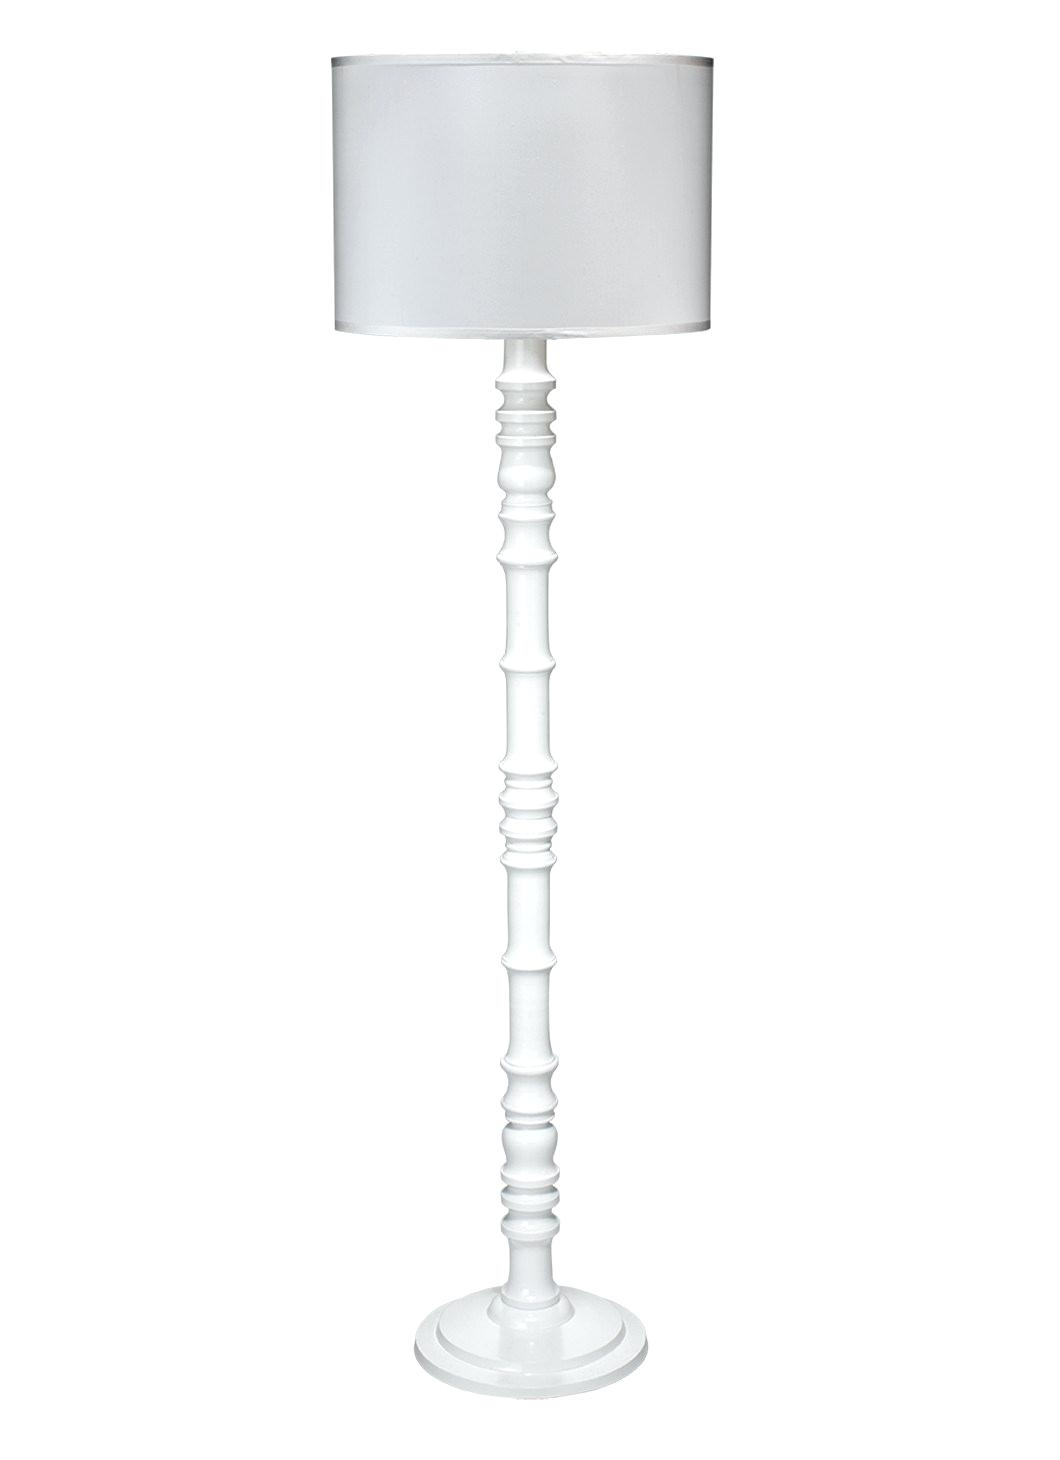 Large White Floor Lamp Lumera intended for dimensions 1060 X 1460